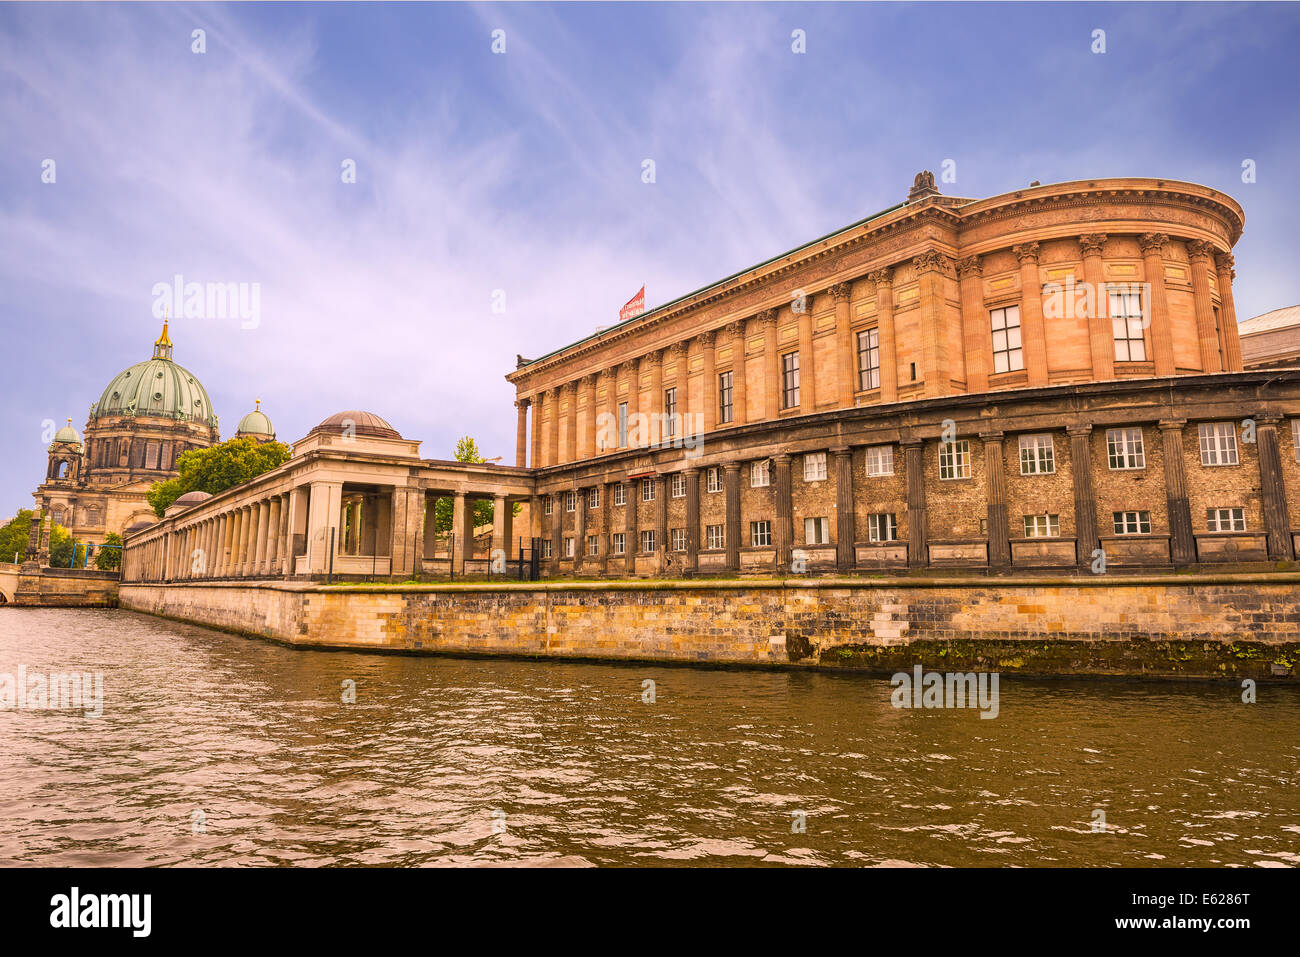 Museum island (Museumsinsel) on Spree river in Berlin with 'Alte Nationalgalerie' and 'Berliner Dom' Stock Photo